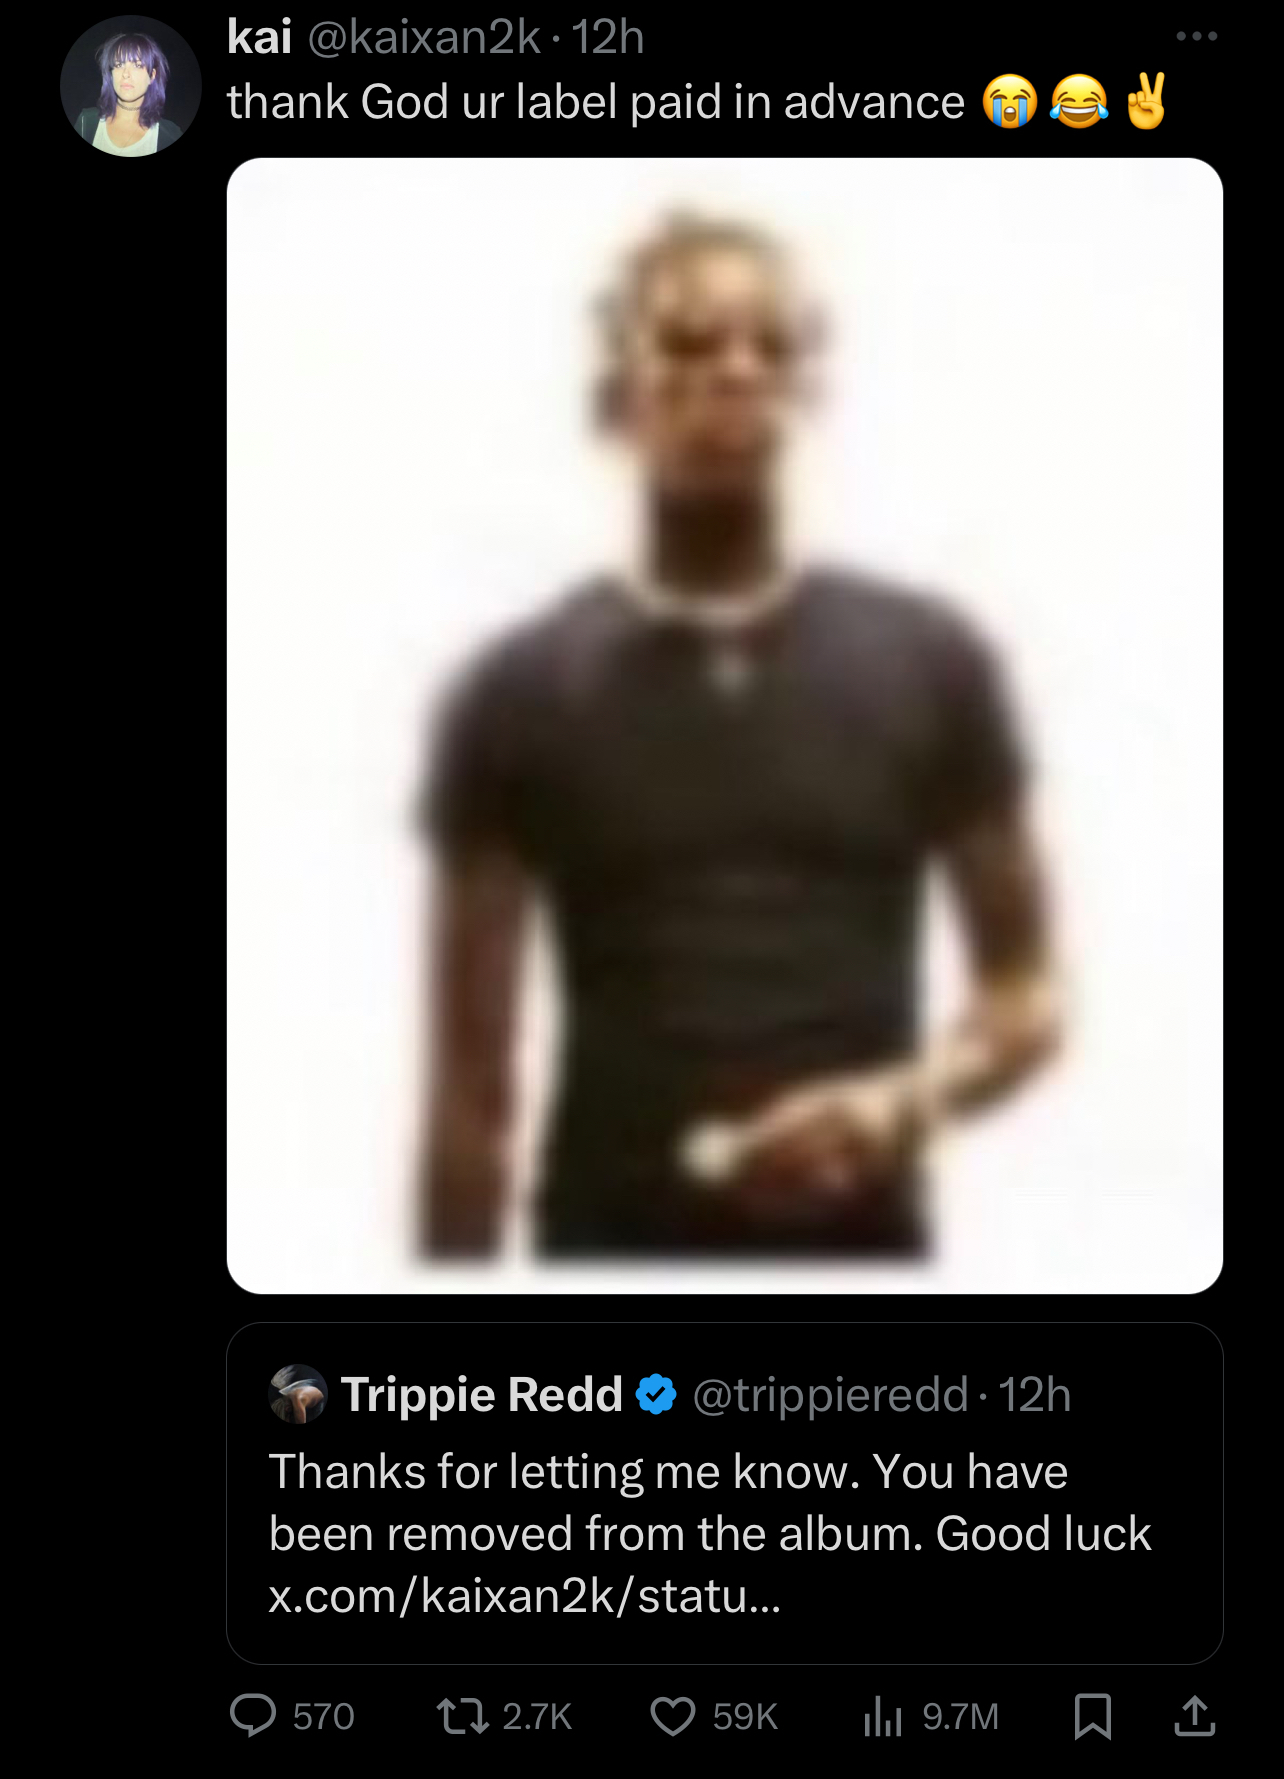 Trippie Redd in a casual black tee, responding to a tweet with a humorous comment